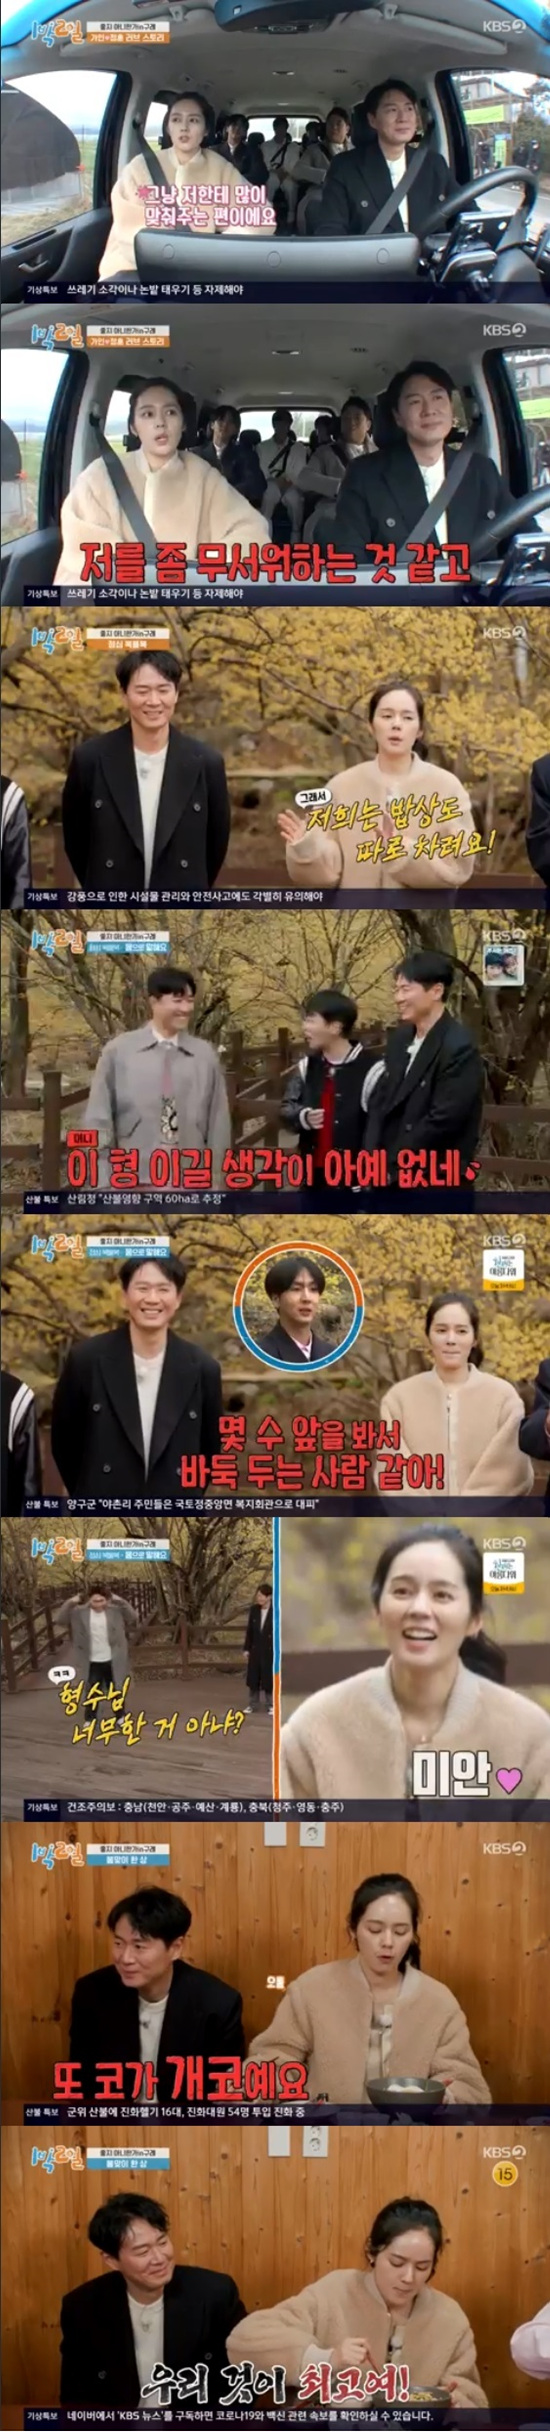 Han Ga-in showed off Bibimbap food with his back to Yeon Jung-hoon.On KBS 2TV Season 4 for 1 Night 2 Days broadcasted on the 10th, Yeon Jung-hoon, Kim Jong-min, Mun Se-yun, DinDin, Ravi and Na In-woo traveled with Han Ga-in.On this day, Yeon Jung-hoon and Han Ga-in gave their members a love story. Han Ga-in said that he was a wedding ceremony and had a lot of charm at the beginning of the honeymoon.Yeon Jung-hoon was hiding before he came home.Han Ga-in said that he was once embarrassed by encountering his father-in-law, Yeon Kyu-jin, not Yeon Jung-hoon.DinDin gave Yeon Jung-hoon an enviable look, saying I would have been happy every day.The members and Han Ga-in arrived at Sansuyu Village and prepared lunch costumes; Han Ga-in said when the members asked about their food tastes, I like it all, its Korean food.Its just too Western, DinDin said, referring to Yeon Jung-hoons love of Western food.So it doesnt fit with me, we set up a separate table, Han Ga-in said.Han Ga-in said, Its perfect when the production team told me about the lunch menu, spring herb bibimbap, cold miso stew, and spring winter.Game, which members and Han Ga-in would be having lunch with, was Speak with your body; DinDin expressed confidence, saying: This is what we won, we have fewer people.Yeon Jung-hoon, a team like DinDin, said a difficult situation could come: I have no intention of winning this brother at all, DinDin said.Ravi, a team like Han Ga-in, laughed, saying, Jung Hoon seems to have a lot of thoughts.Starting with Yeon Jung-hoons songstress team: The themes were film and drama; Kim Jong-min said, What is this?Is this an entertainment? and was embarrassed. The Yanga team got quite a lot of problems thanks to DinDins performance.DinDin was anxious to see if the Hangan team seemed to have hit a lot ahead of the results announcement, saying, I saw this brother and I delayed a few delays.The production team said that Yangane and Hangane hit eight and 11 respectively; Han Ga-in cheered with the team members when the victory was confirmed.Mun Se-yun asked Han Ga-in if he was willing to give him a spoonful for Yeon Jung-hoon.Han Ga-in said firmly, If you lose because you win the game, you will eat if you starve and win.Han Ga-in, as he drove to lunch, told me that the movie The Cruelty of the Horse was the highest weight of his life: it was like weight when he was pregnant.Han Ga-in said he had been drinking for a long time and had not had a drink for seven or eight years.Han Ga-in did not spoon the bibimbap and miso stew, which came out for lunch, saying it was really delicious.Kim Jong-min said, I want to reject it for the first time.Photo: KBS Broadcasting Screen